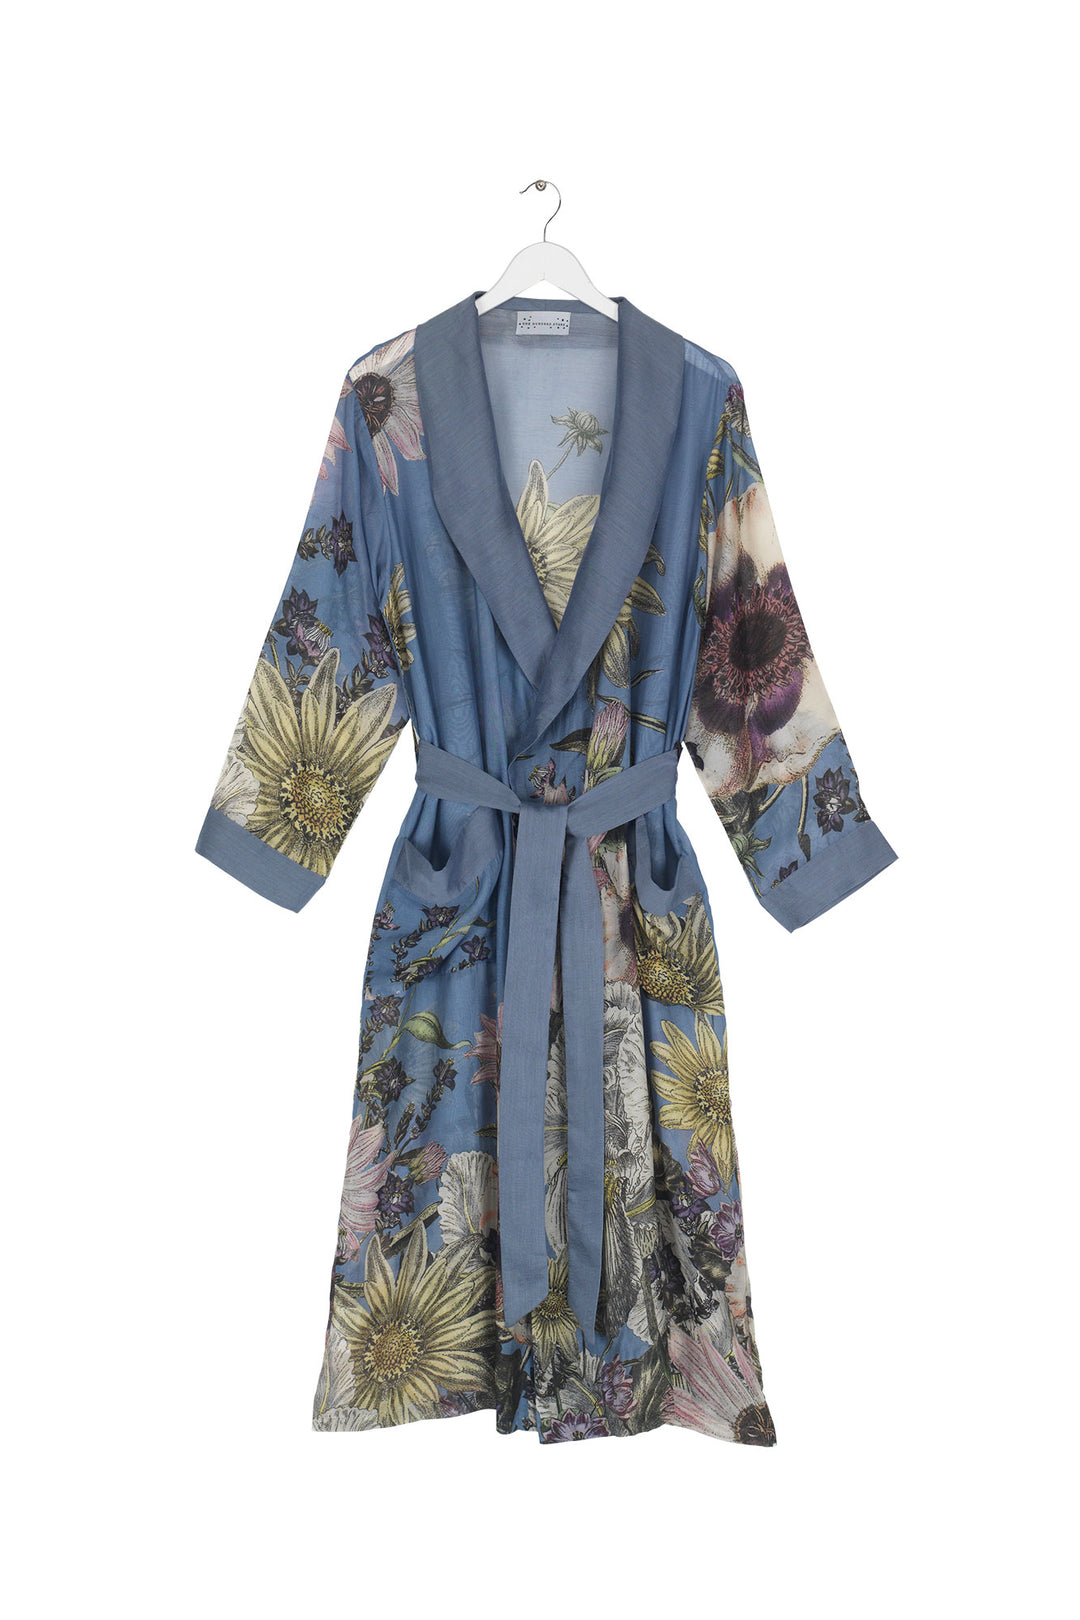 Women's lightweight loungewear gown in cornflower blue with daisy floral print by One Hundred Stars